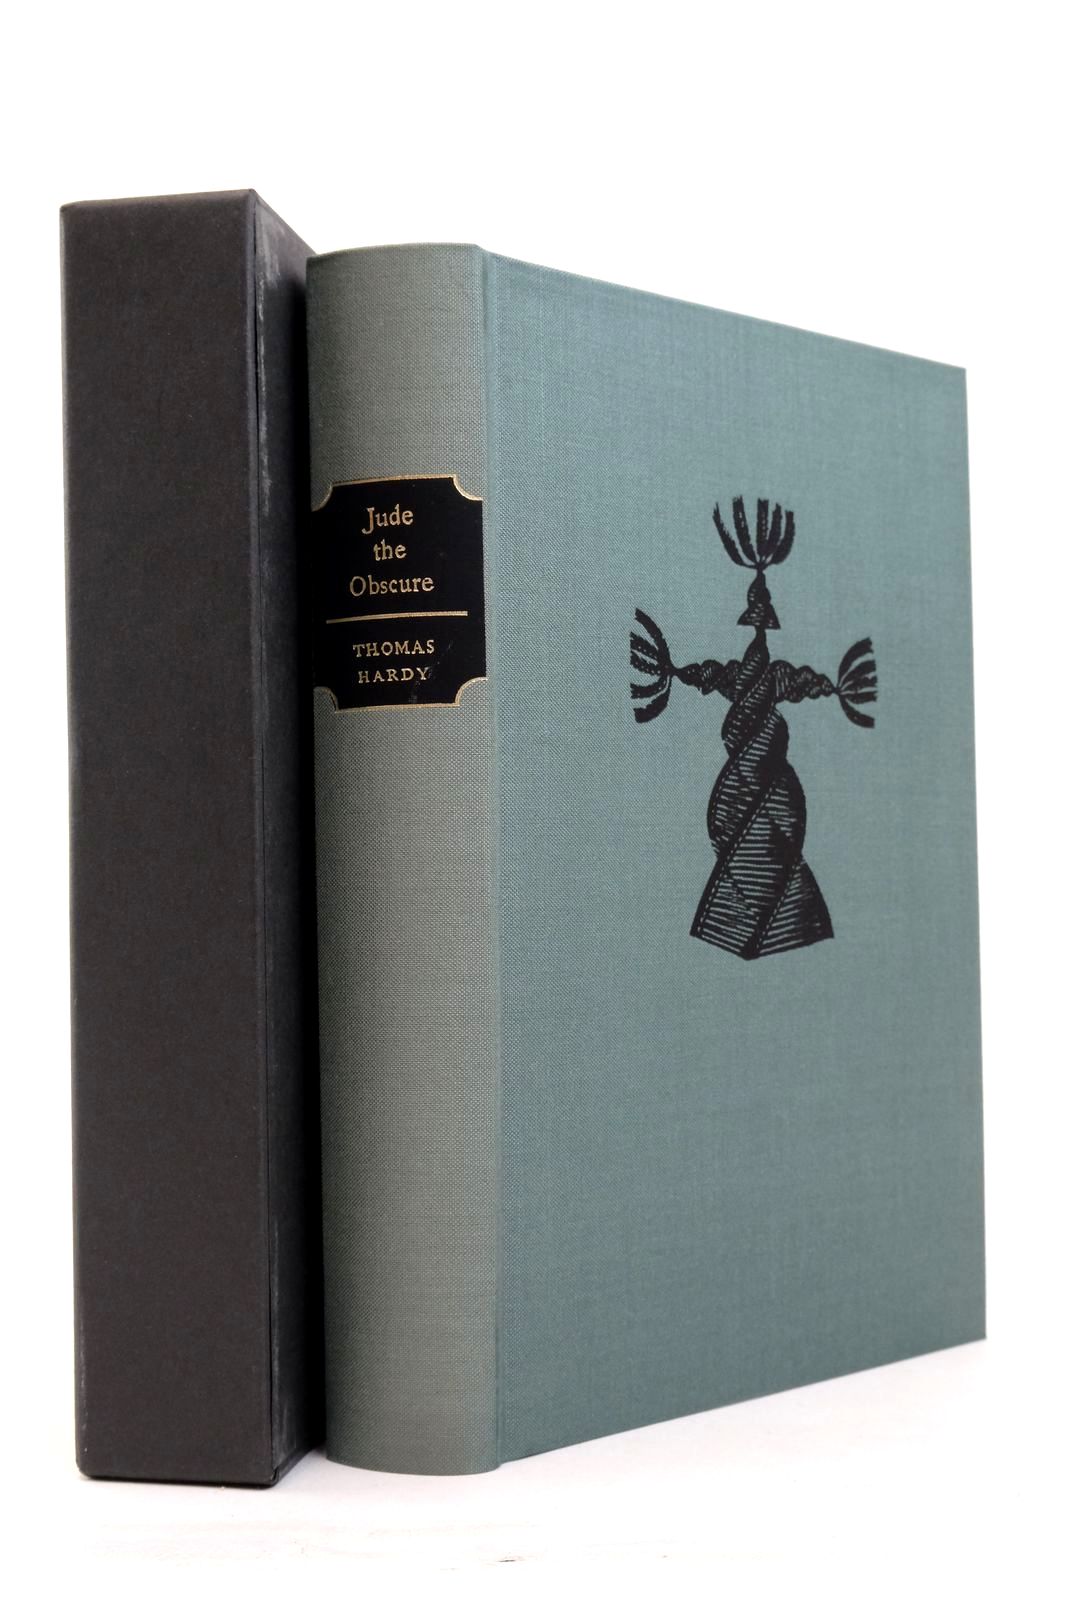 Photo of JUDE THE OBSCURE written by Hardy, Thomas illustrated by Reddick, Peter published by Folio Society (STOCK CODE: 2138219)  for sale by Stella & Rose's Books